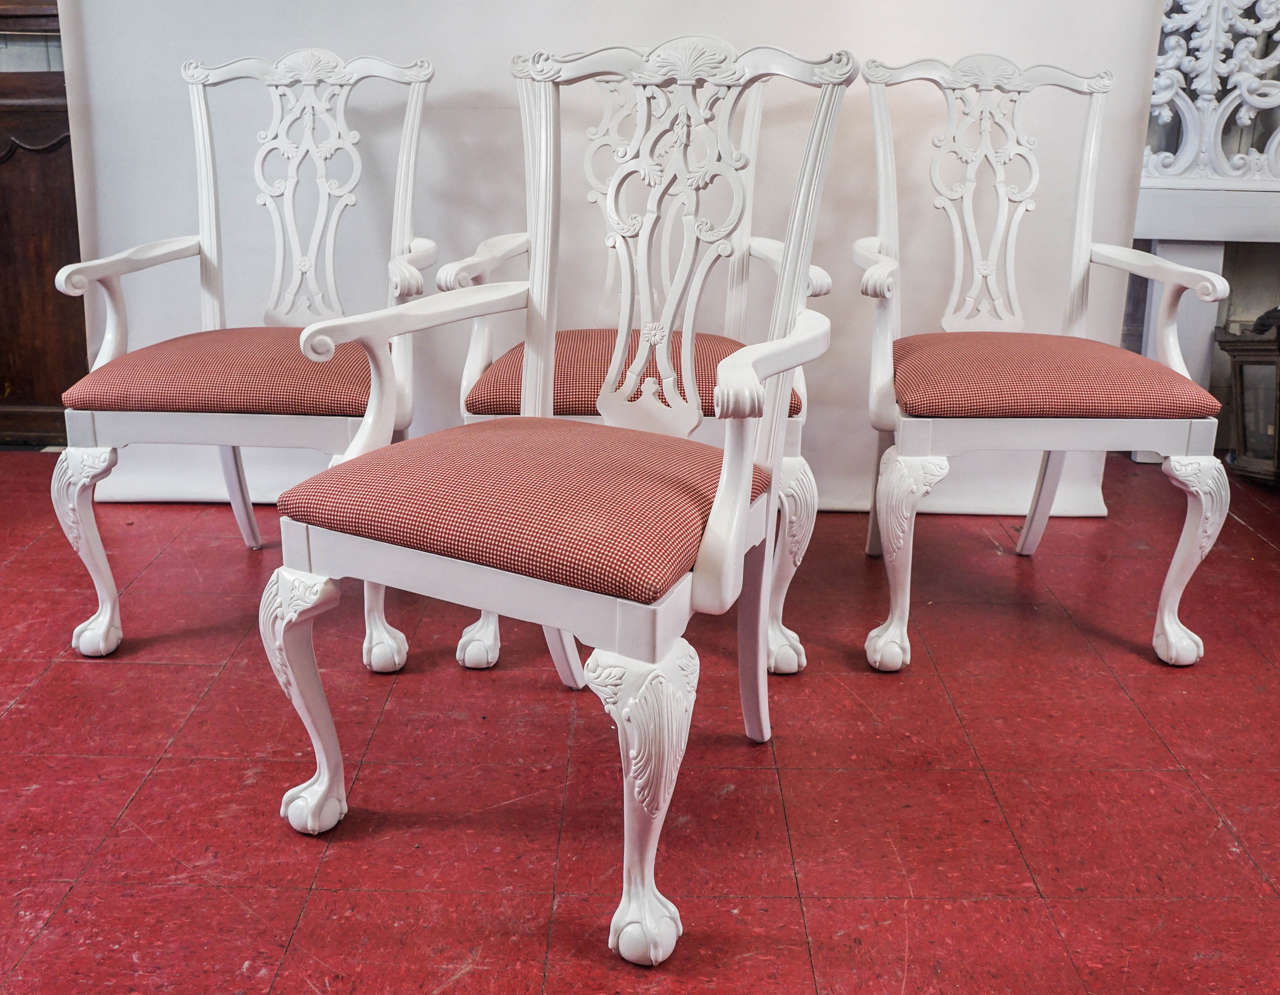 Classic Chippendale style dining armchairs with scroll backs and ball-in-claw feet.
Measures: Arm height 26